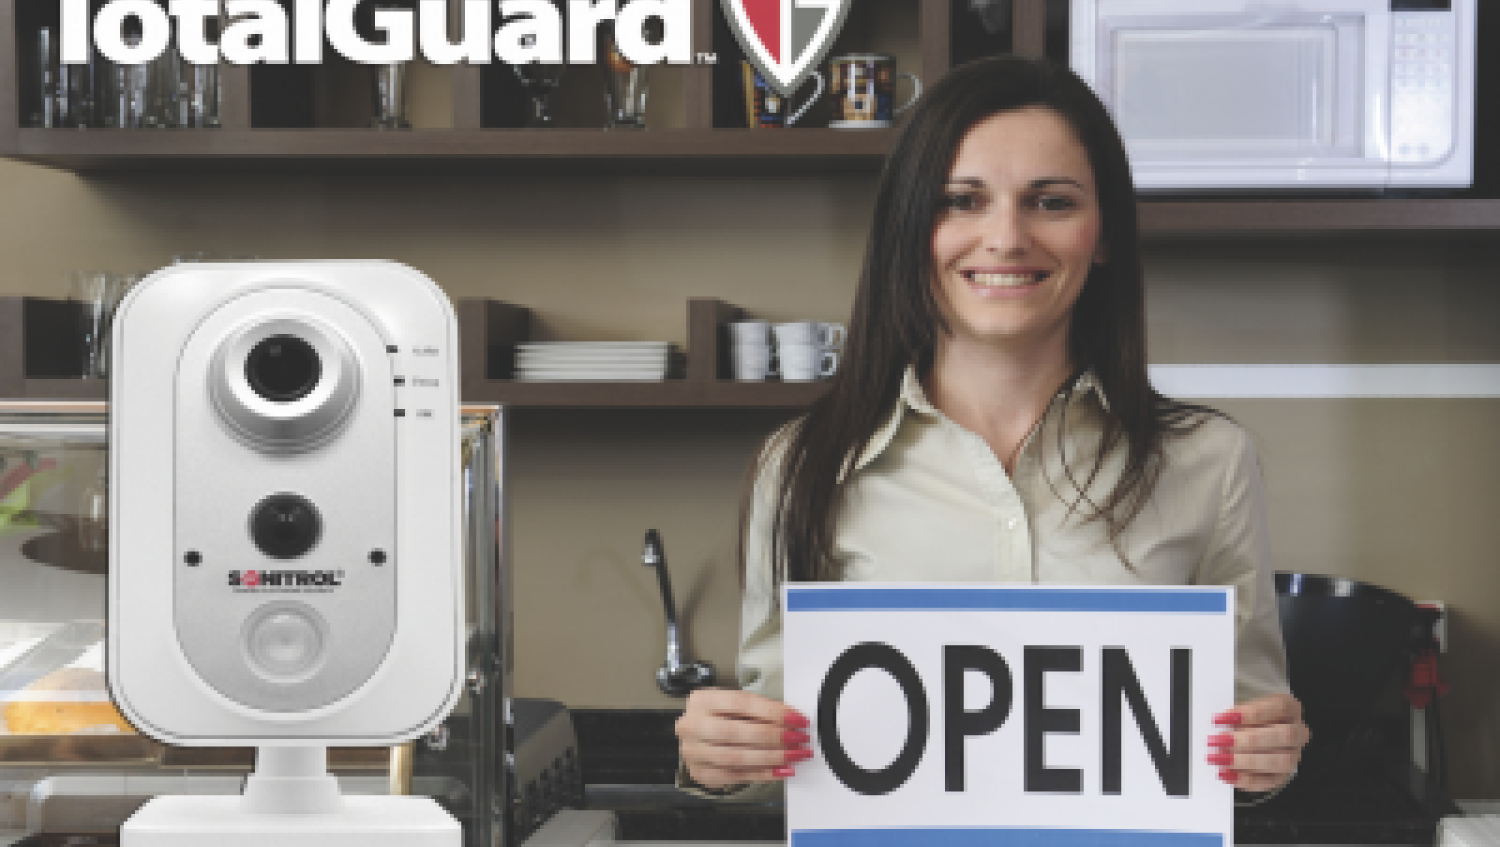 TotalGuard & logo with security camera and retail employee